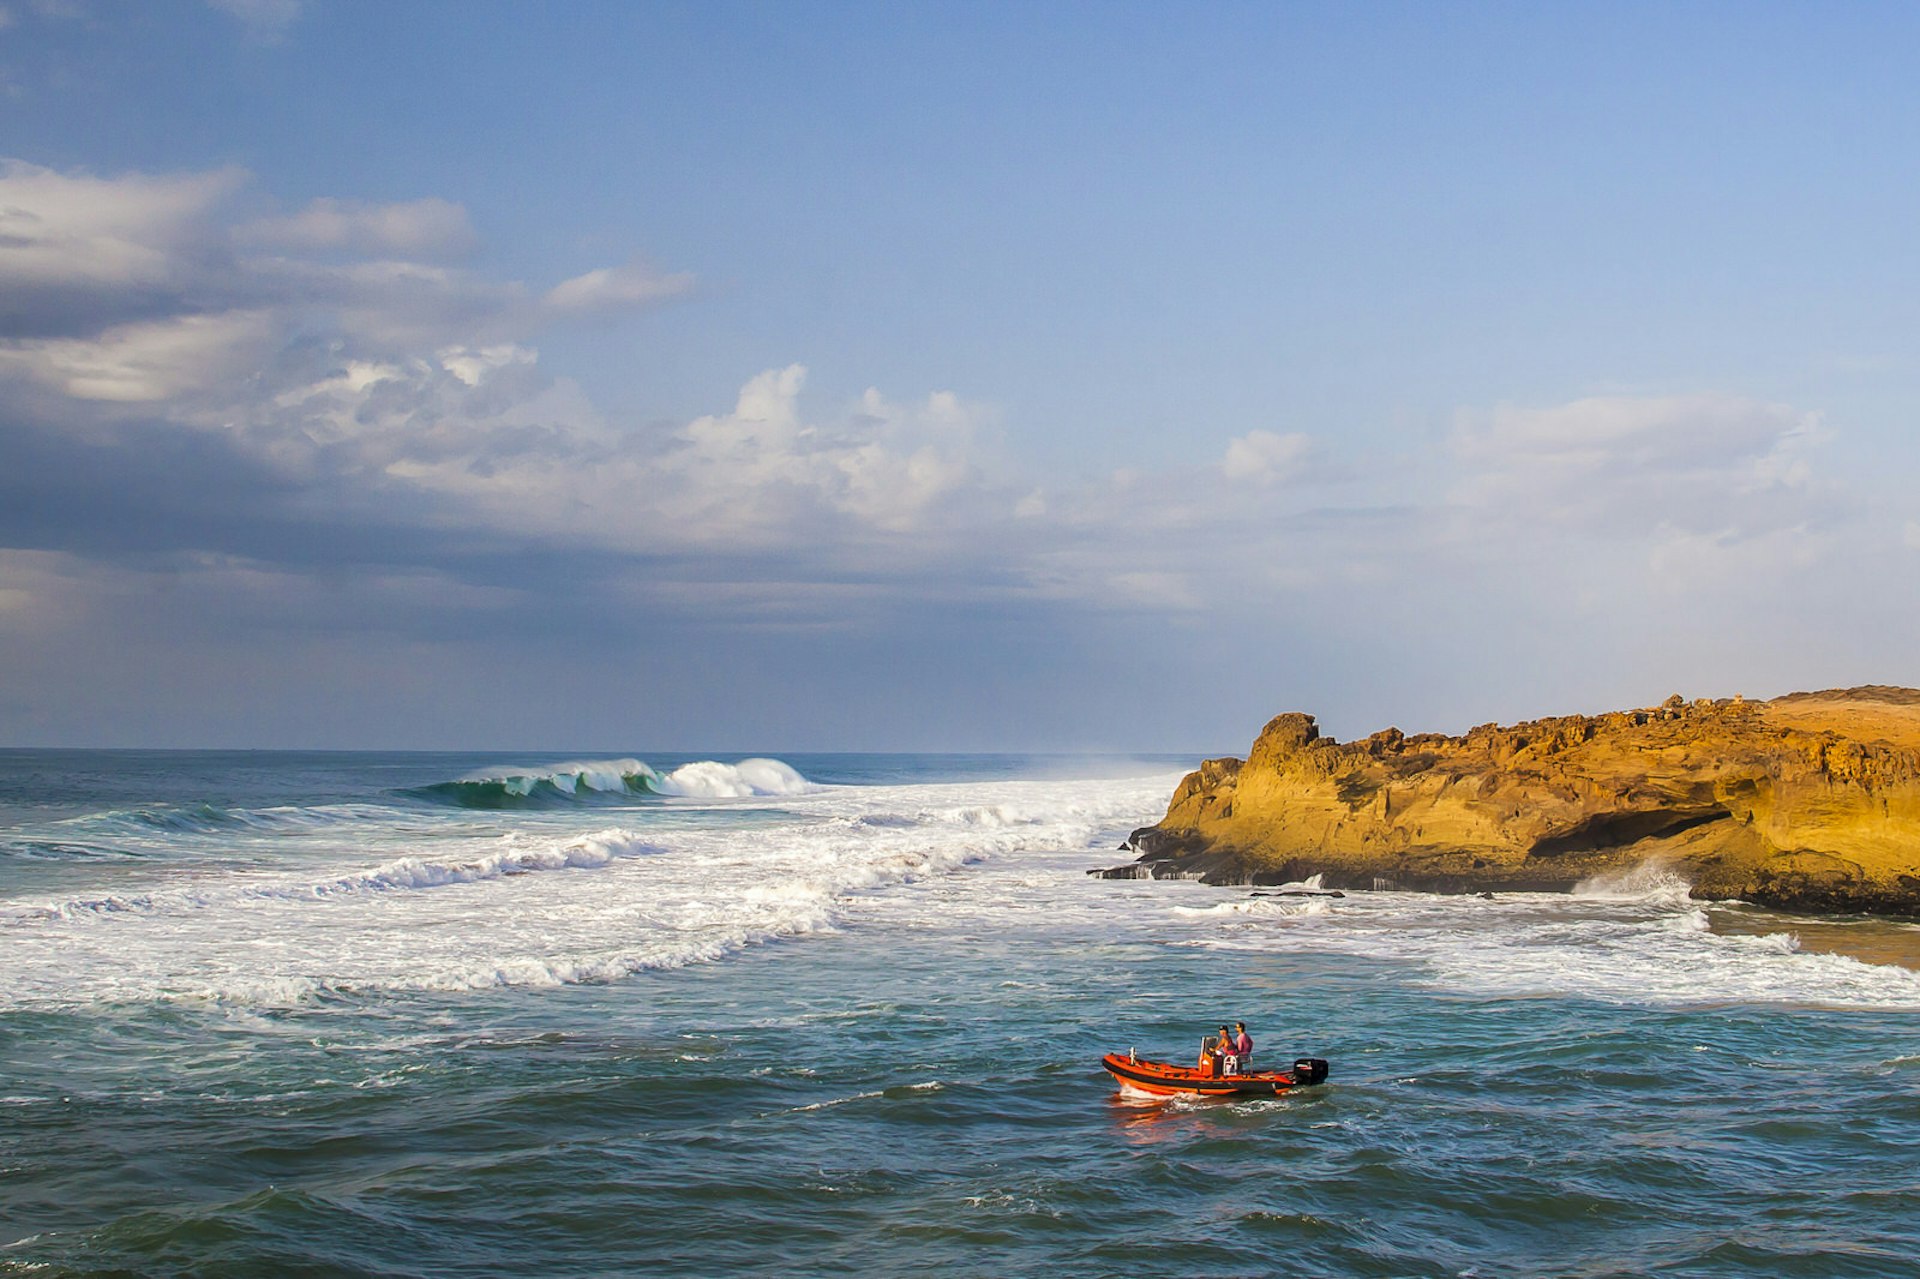 Boat in the Atlantic Ocean near Oualidia, Morocco © LUKASZ-NOWAK1 / Getty Images